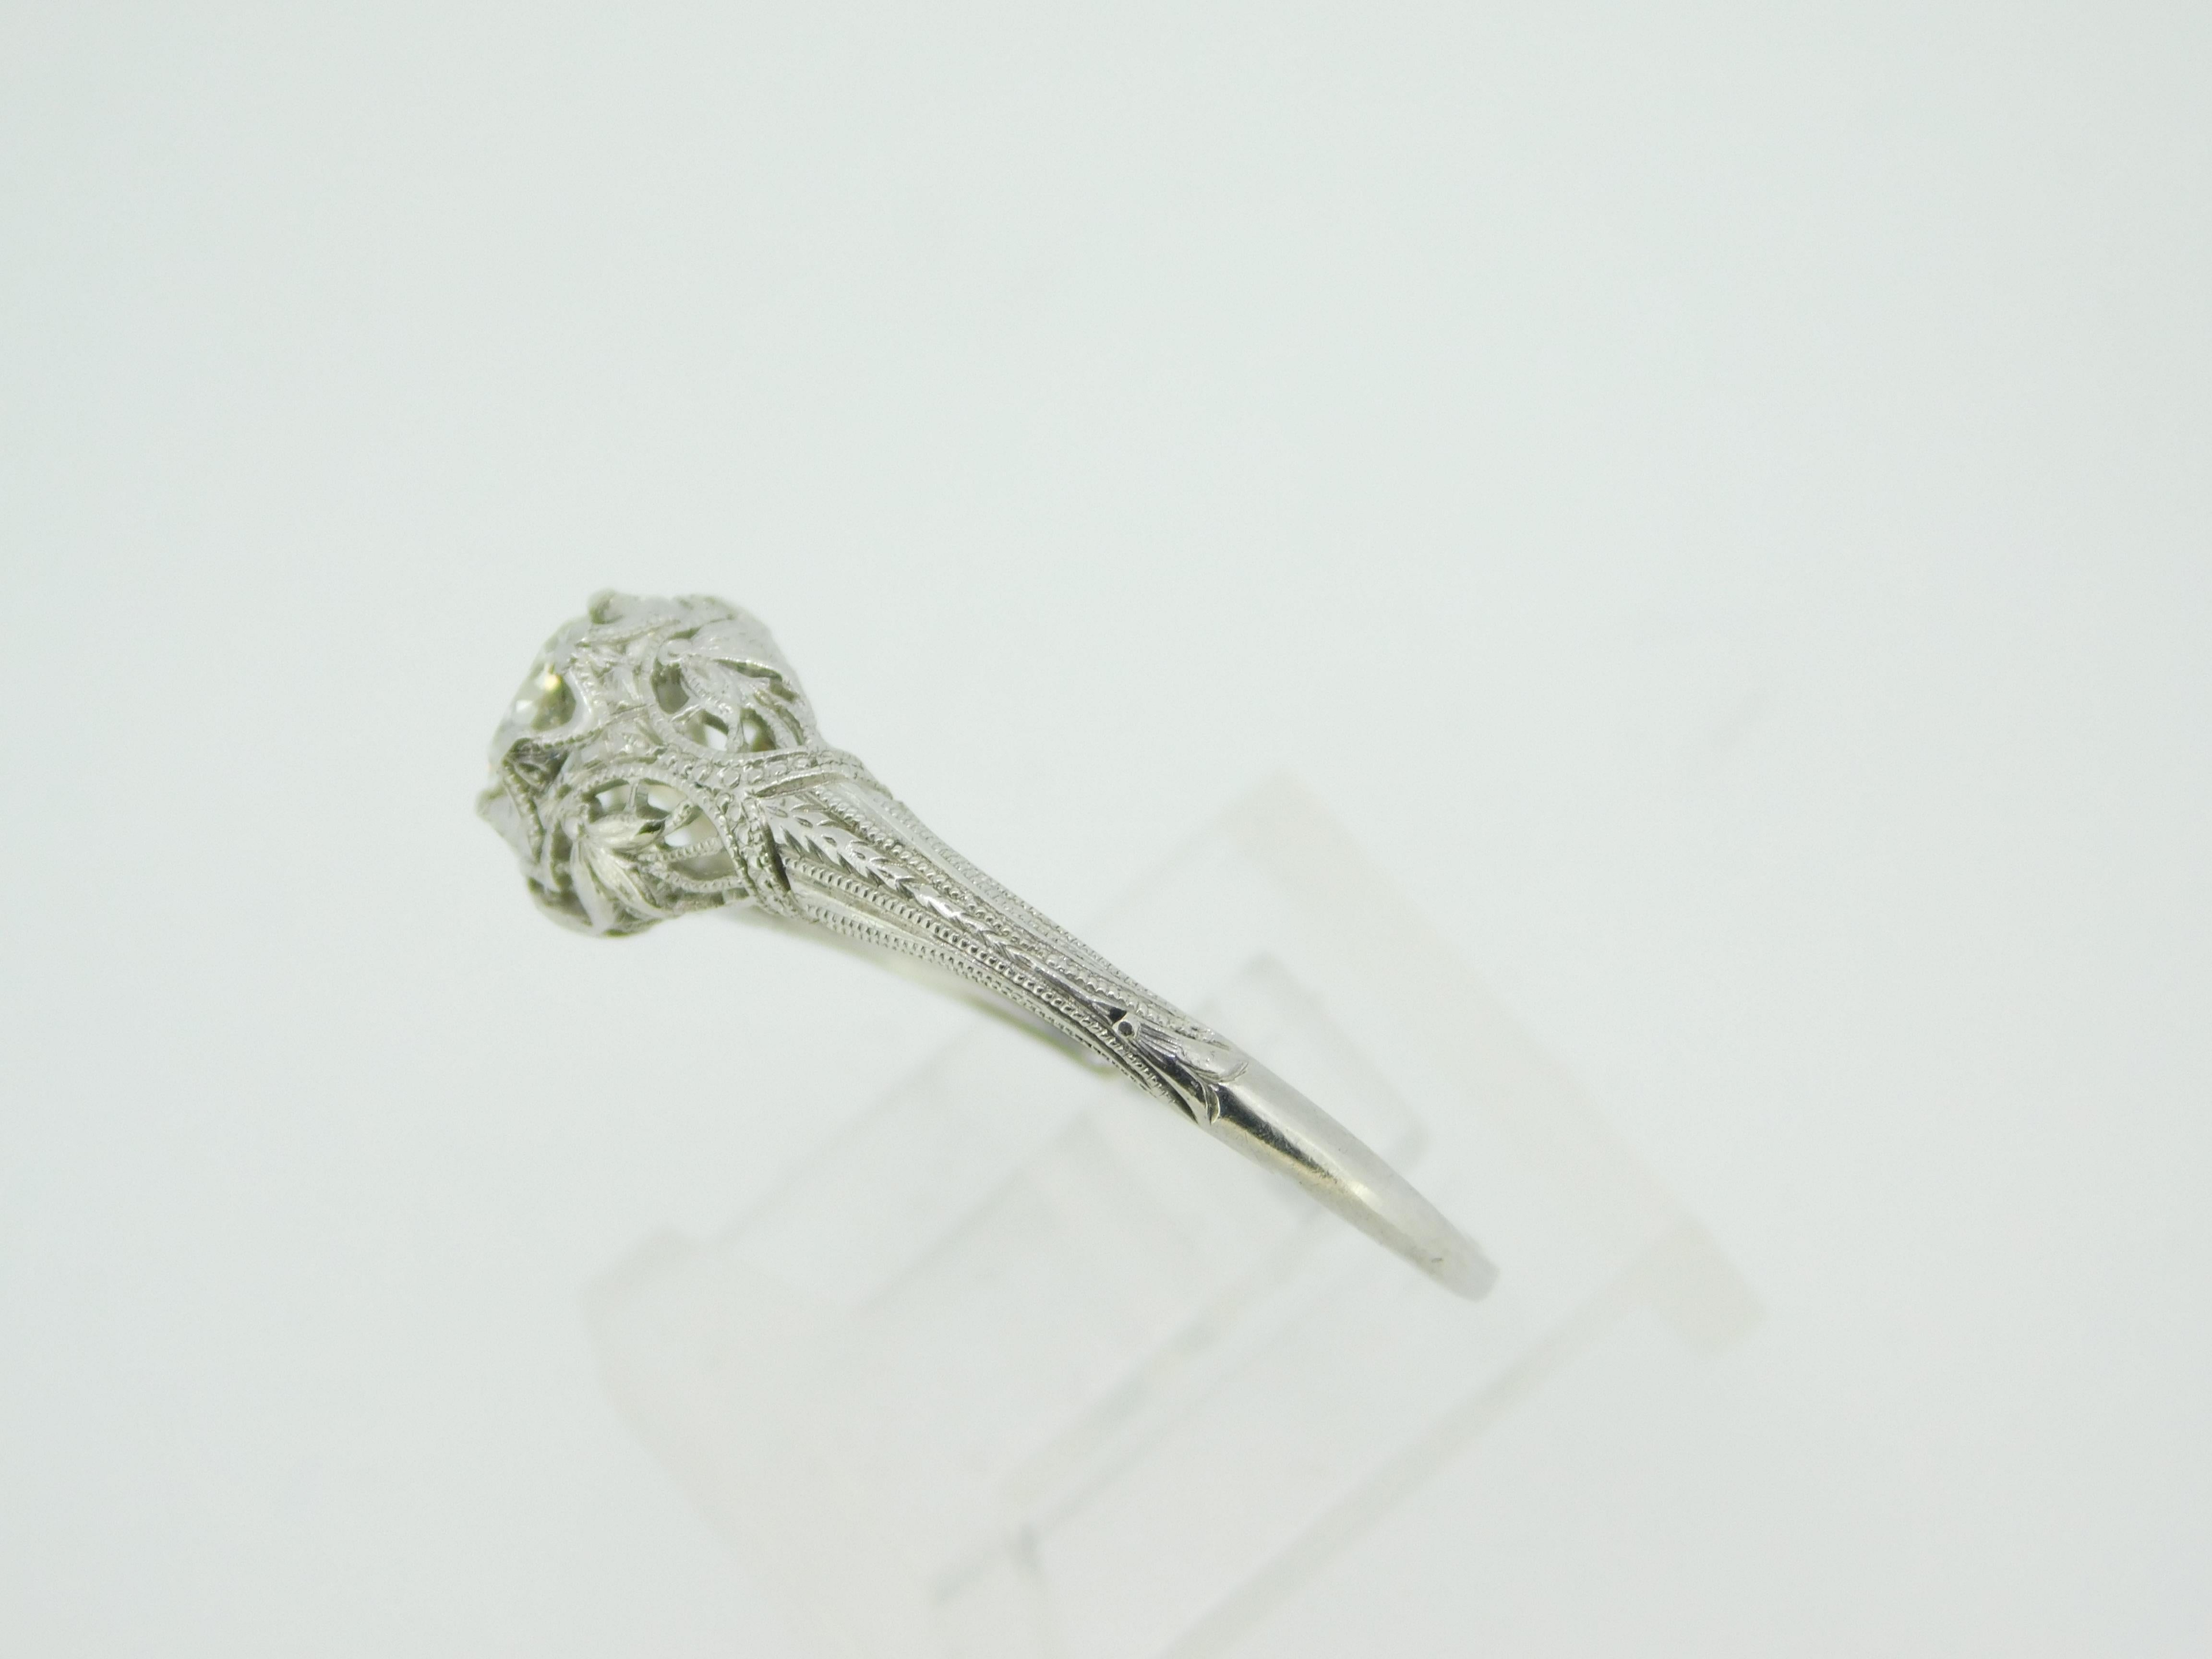 Platinum Art Deco Filigree .37ct Genuine Natural Diamond Ring Size 8 (#J4249)

Platinum Art Deco diamond filigree ring. The diamond is round brilliant cut weighing .37cts and measuring approximately 5.5mm. The diamond has VS clarity and I-J color.